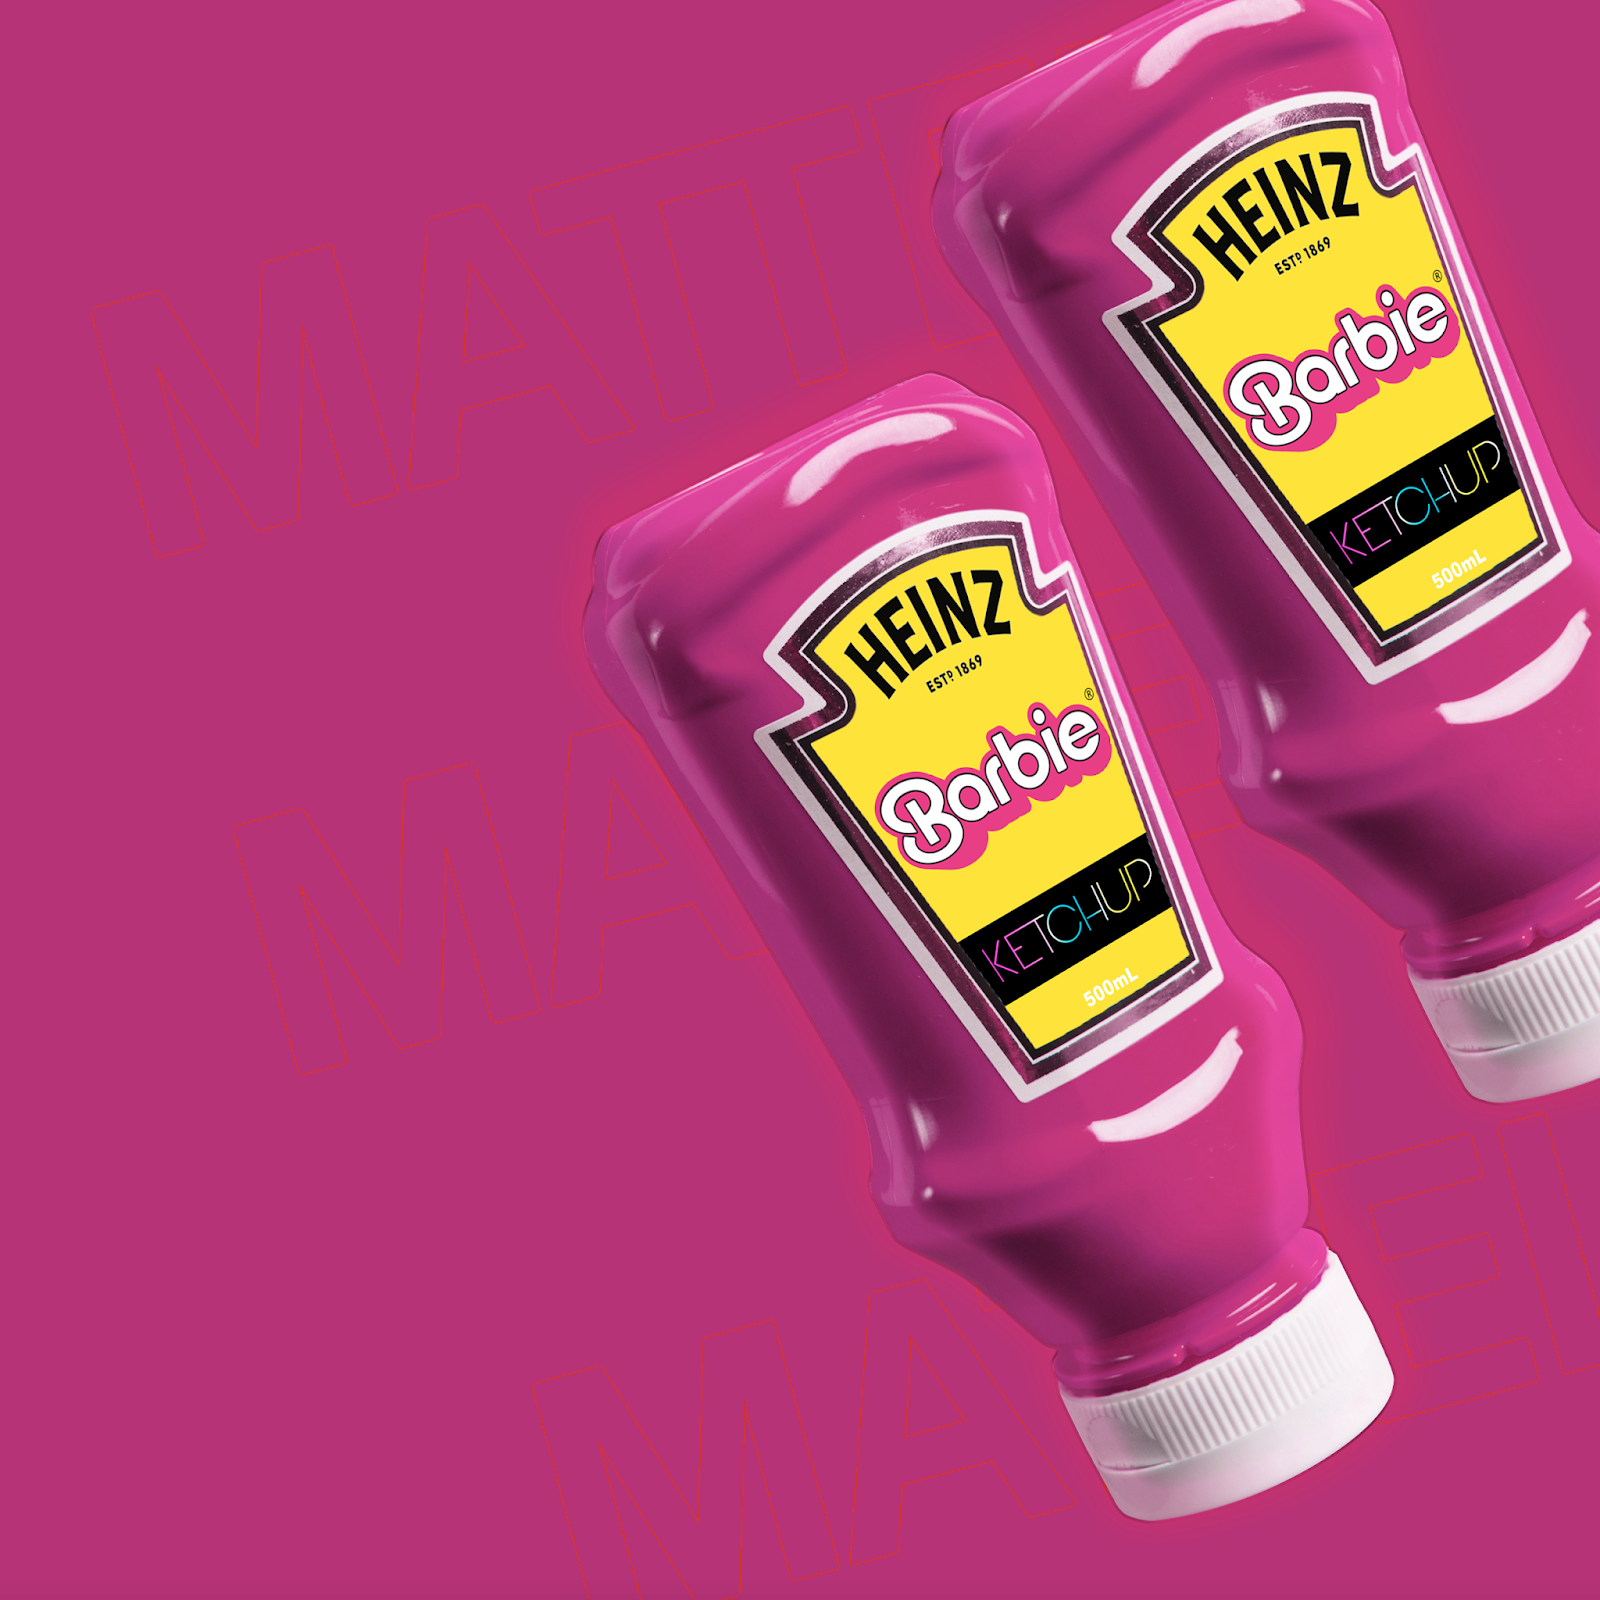 Barbie x Heinz Ketchup on Packaging of the World - Creative Package ...